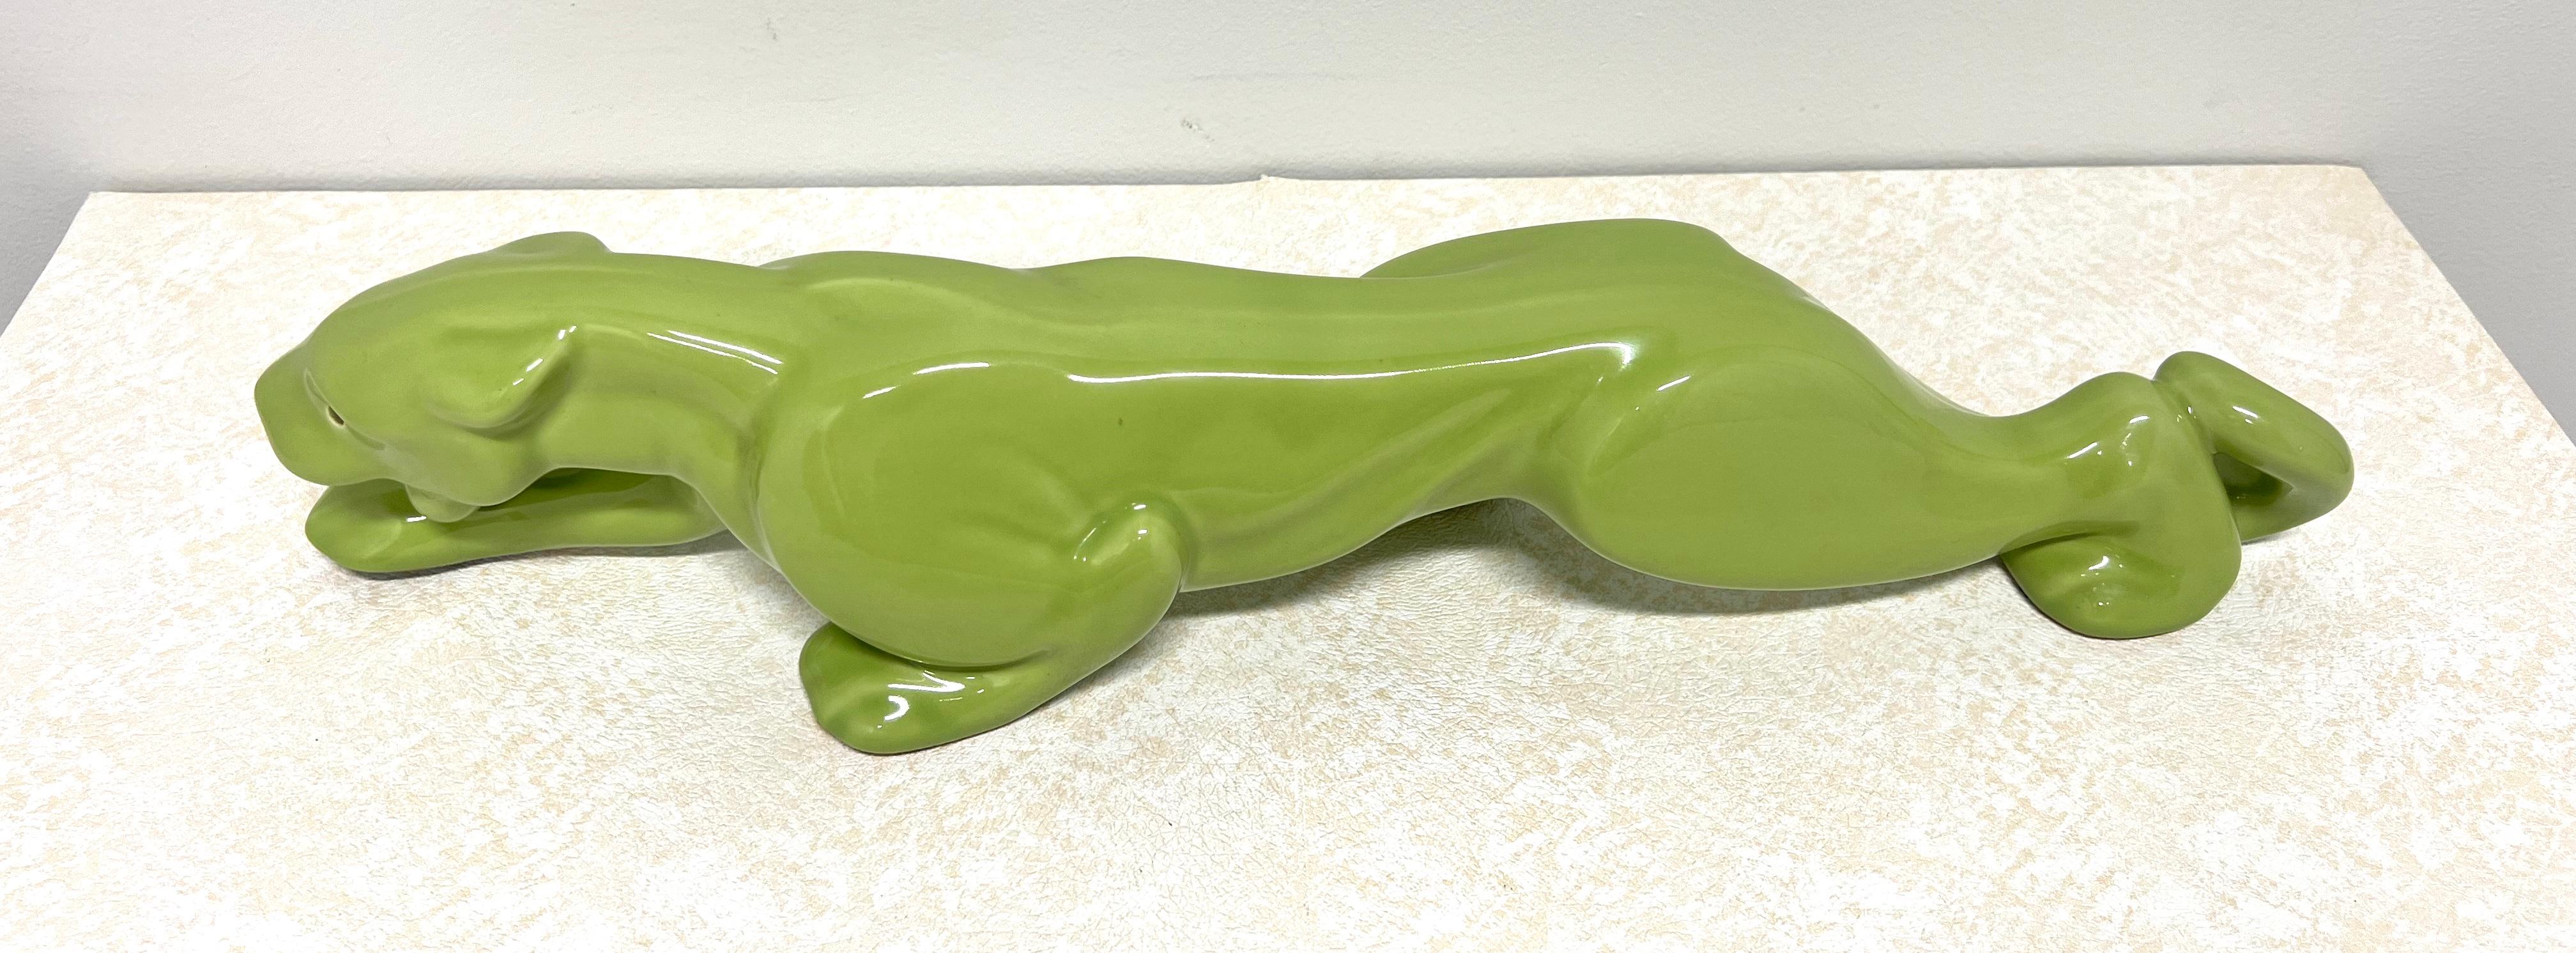 Mid-Century Modern Mid 20th Century Chartreuse Green Ceramic Panther TV Lamp For Sale